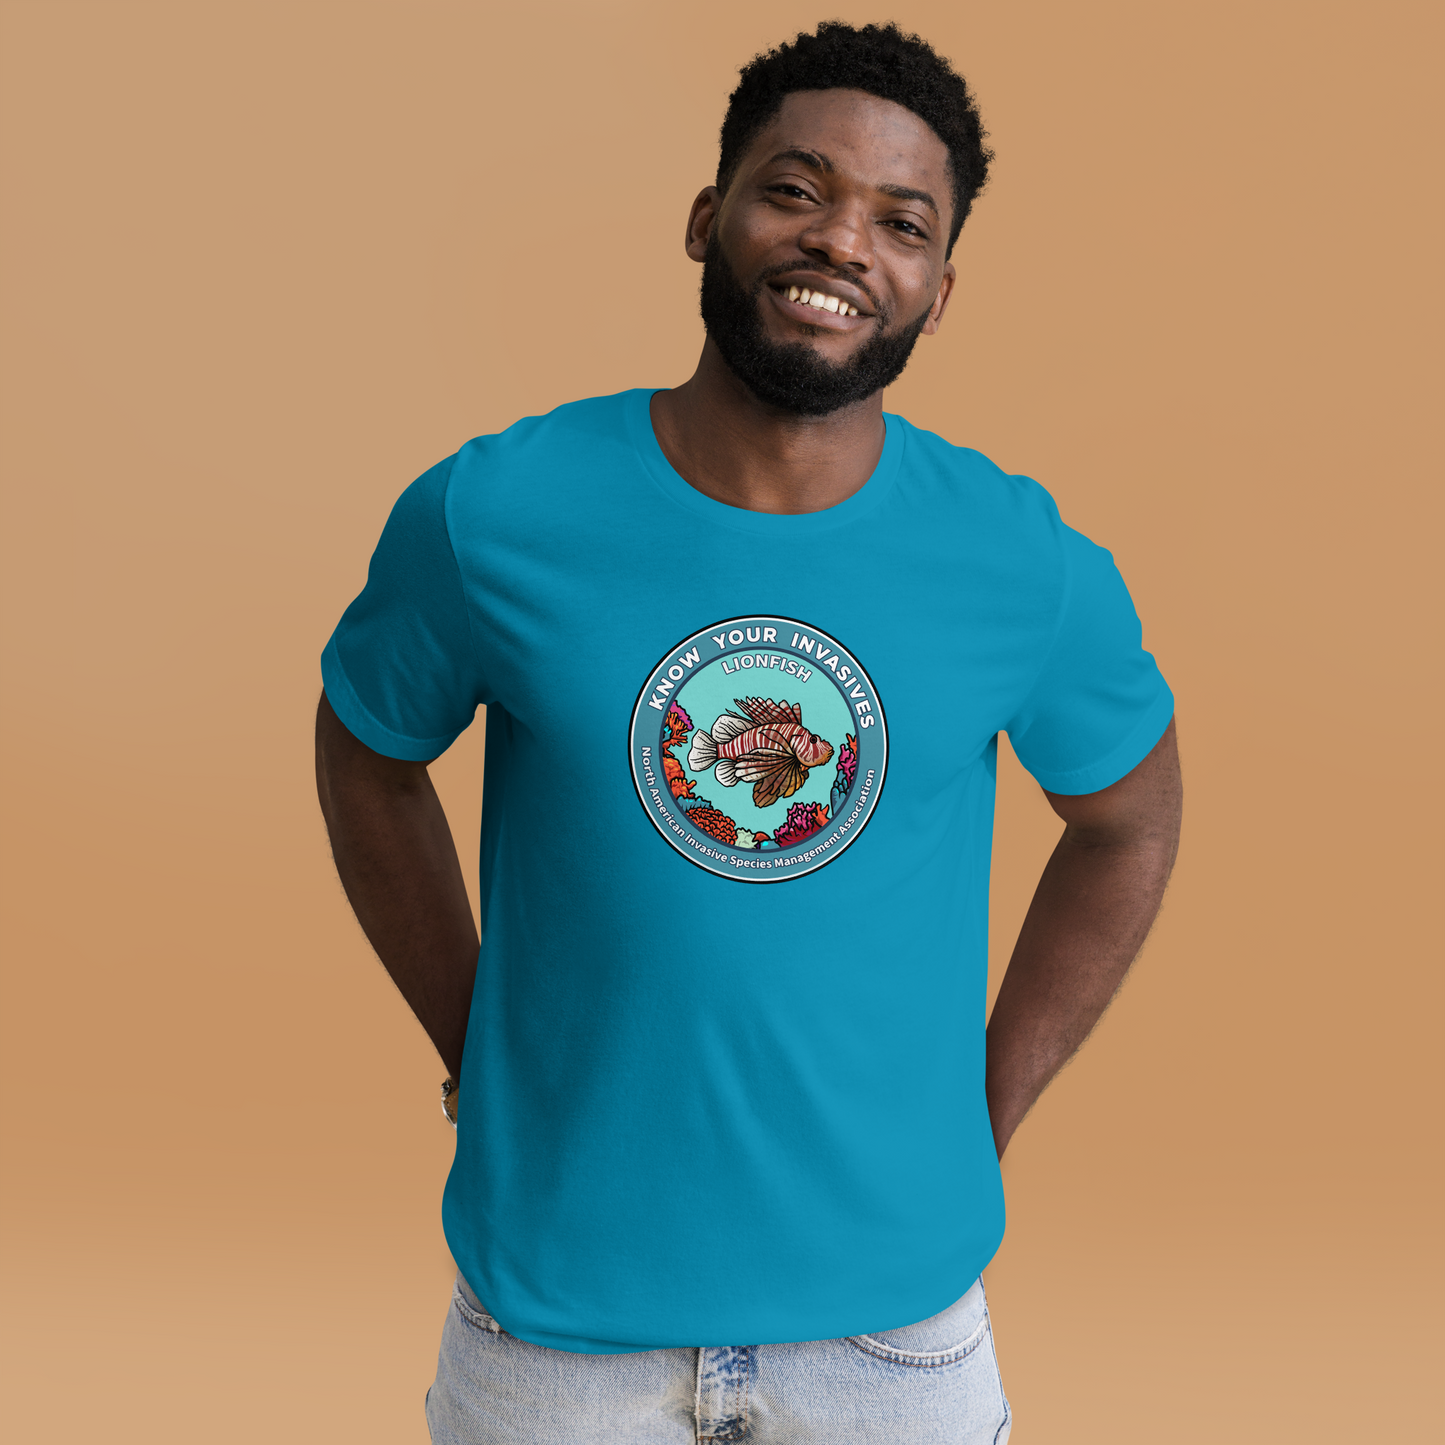 Know Your Invasives - Lionfish Awareness T-shirt